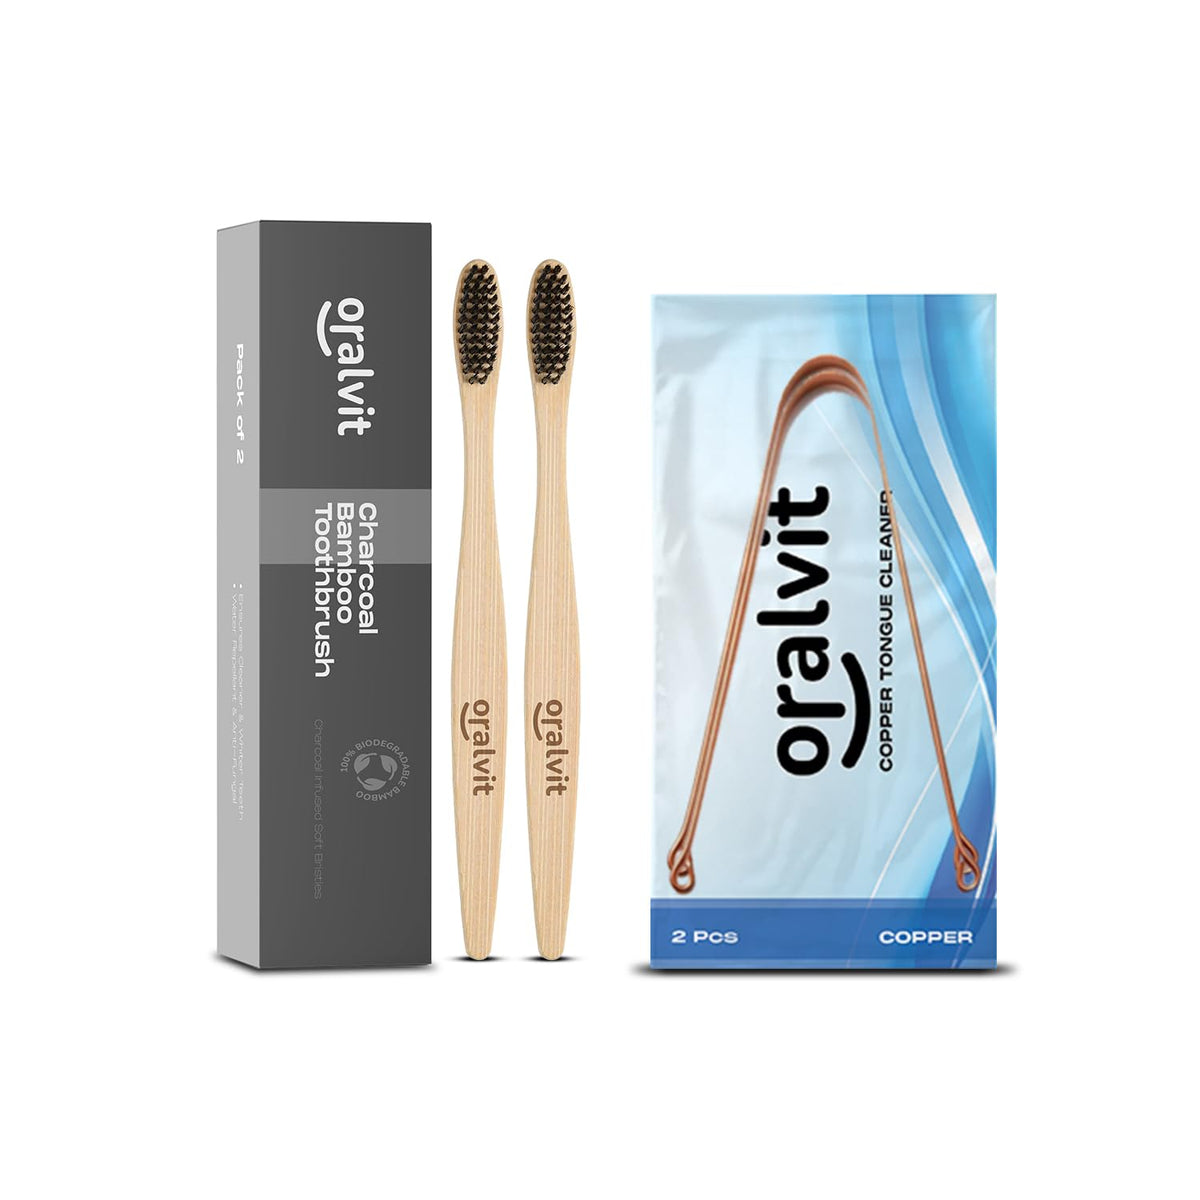 Oralvit Charcoal Bamboo Toothbrush - Pack Of 2 & Copper Tongue Cleaner - 2 Pcs